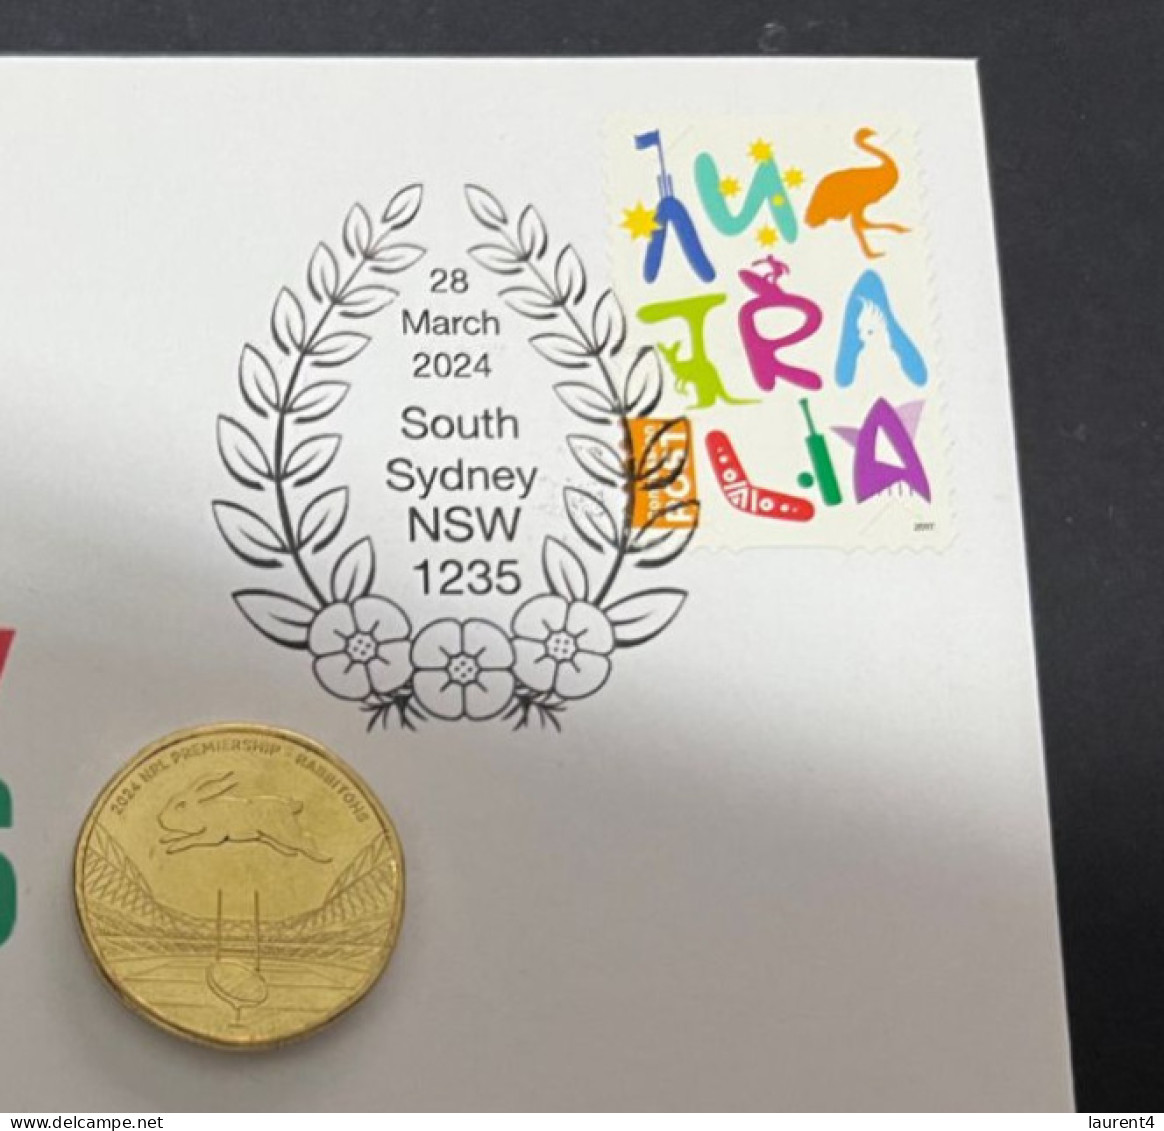 29-3-2024 (4 Y 23) Australian New $ 1.00 Coin (NRL South Sydney Rabbitohs) Released 28-3-2024 (1 X Coin On Cover) - Dollar